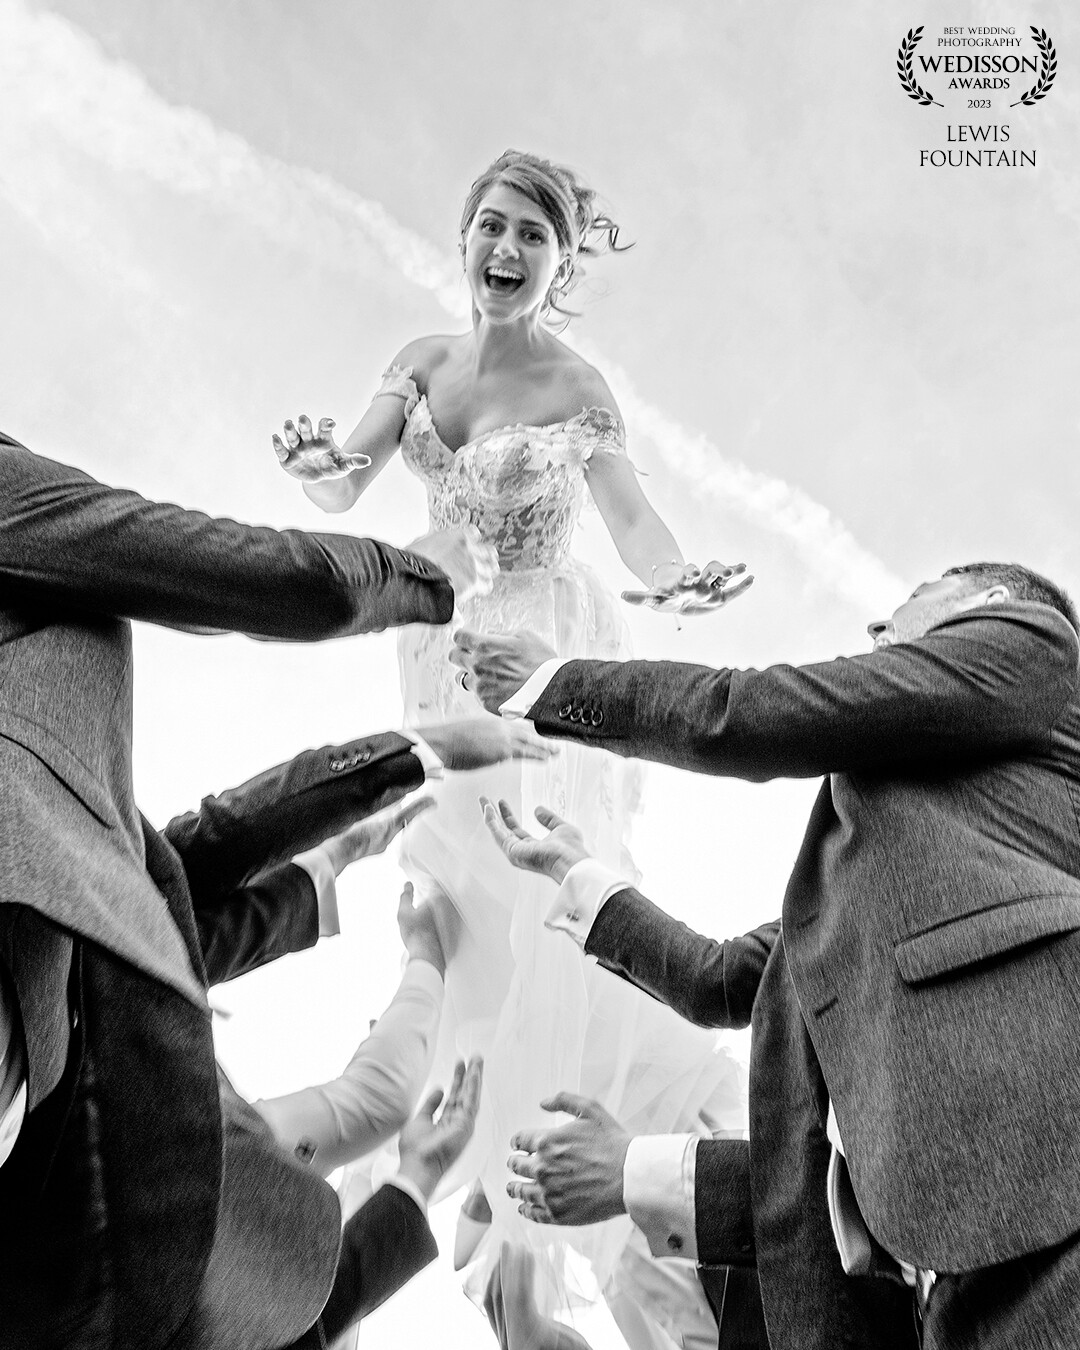 The Old Hall Ely is a wedding venue that gives us so much inspiration, but we didn’t expect to get this shot of Klea, our bride, being launched into the air by the groomsmen!<br />
Klea watched us doing a similar shot with Dan, her groom, and immediately asked if she could have a go, and obviously we couldn’t refuse 😂